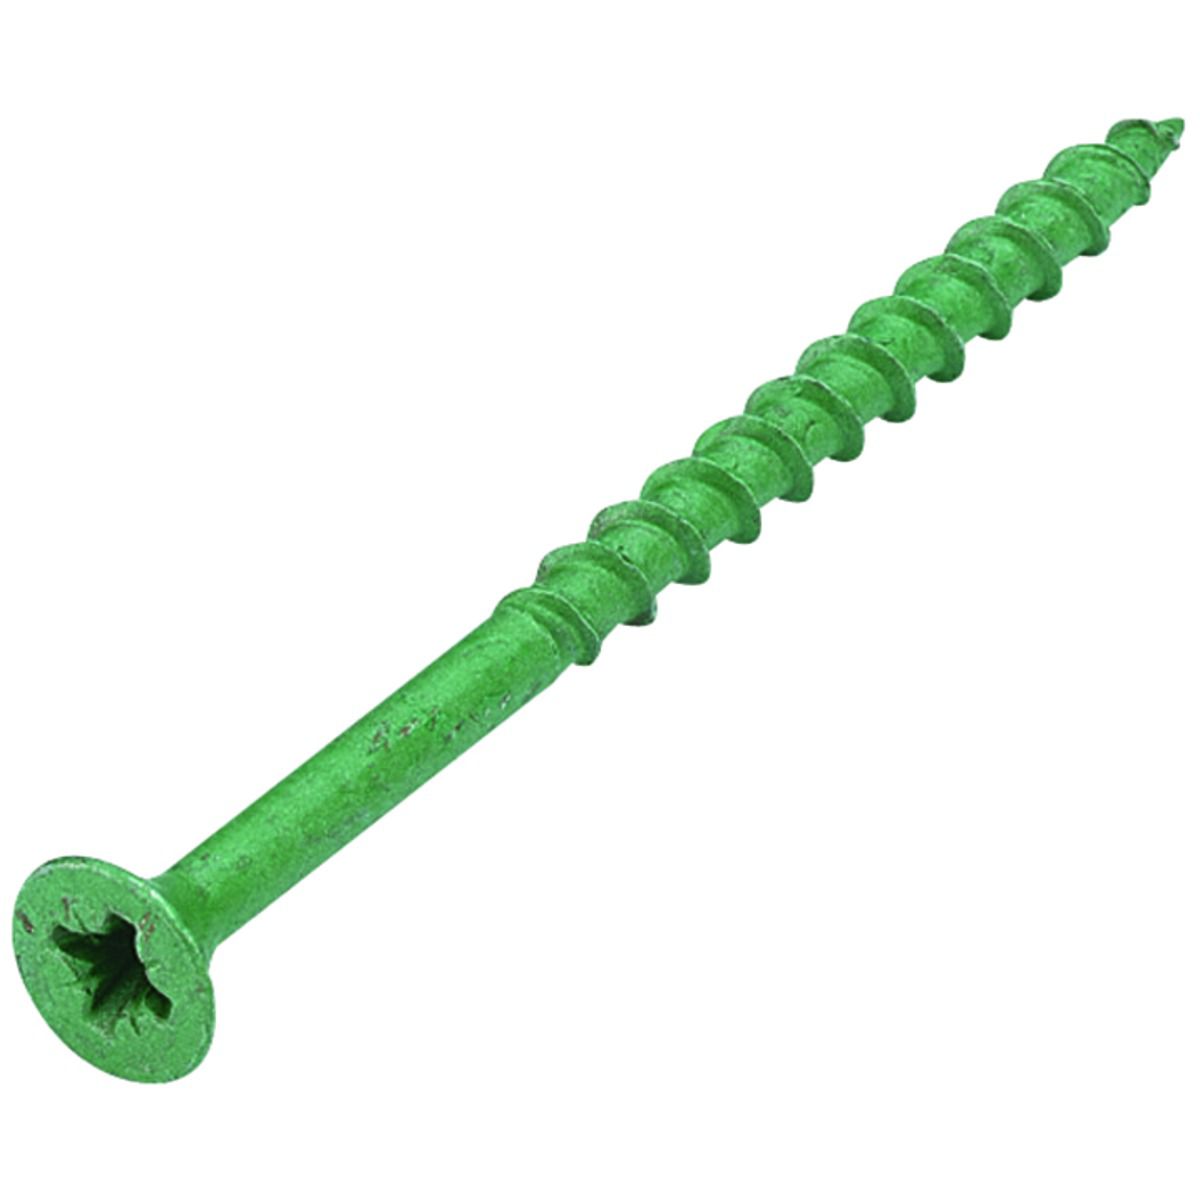 Image of Wickes External Grade Screw - Green No 8 x 63mm Pack of 150